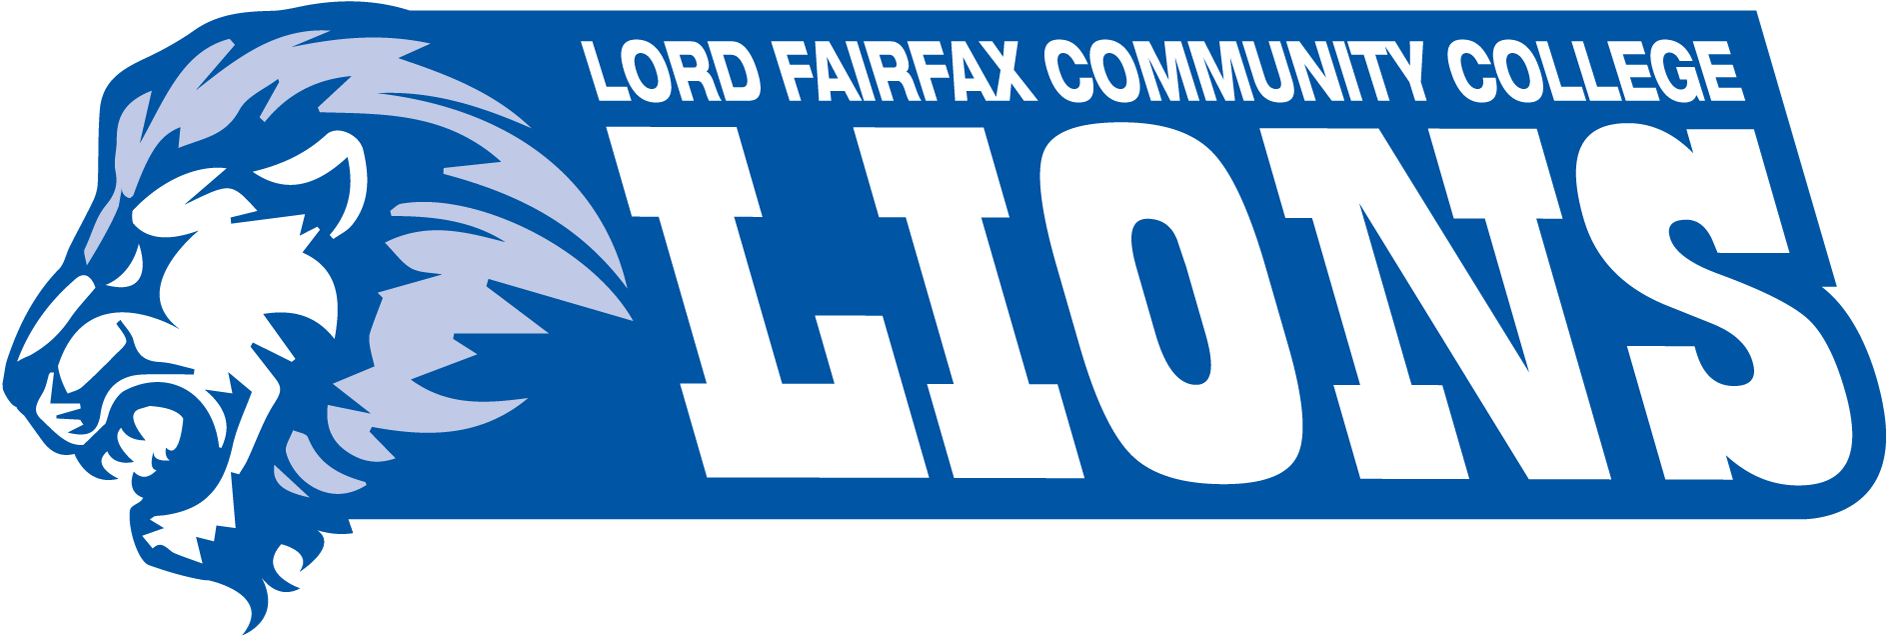 Png - Lord Fairfax Community College (2000x769), Png Download